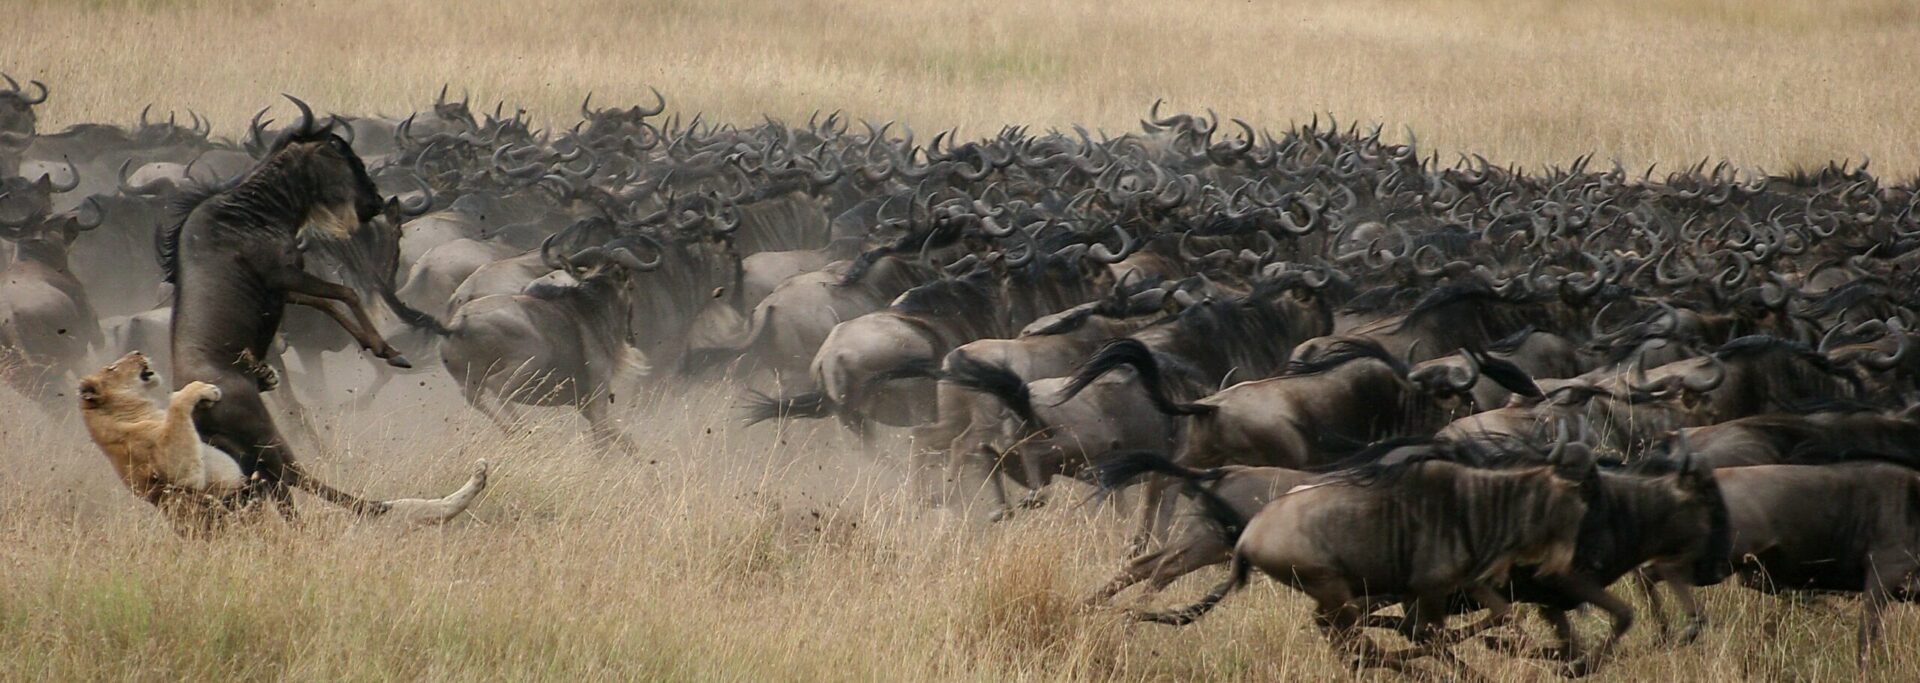 lion hunting a herd of wildebeest in the brown grass